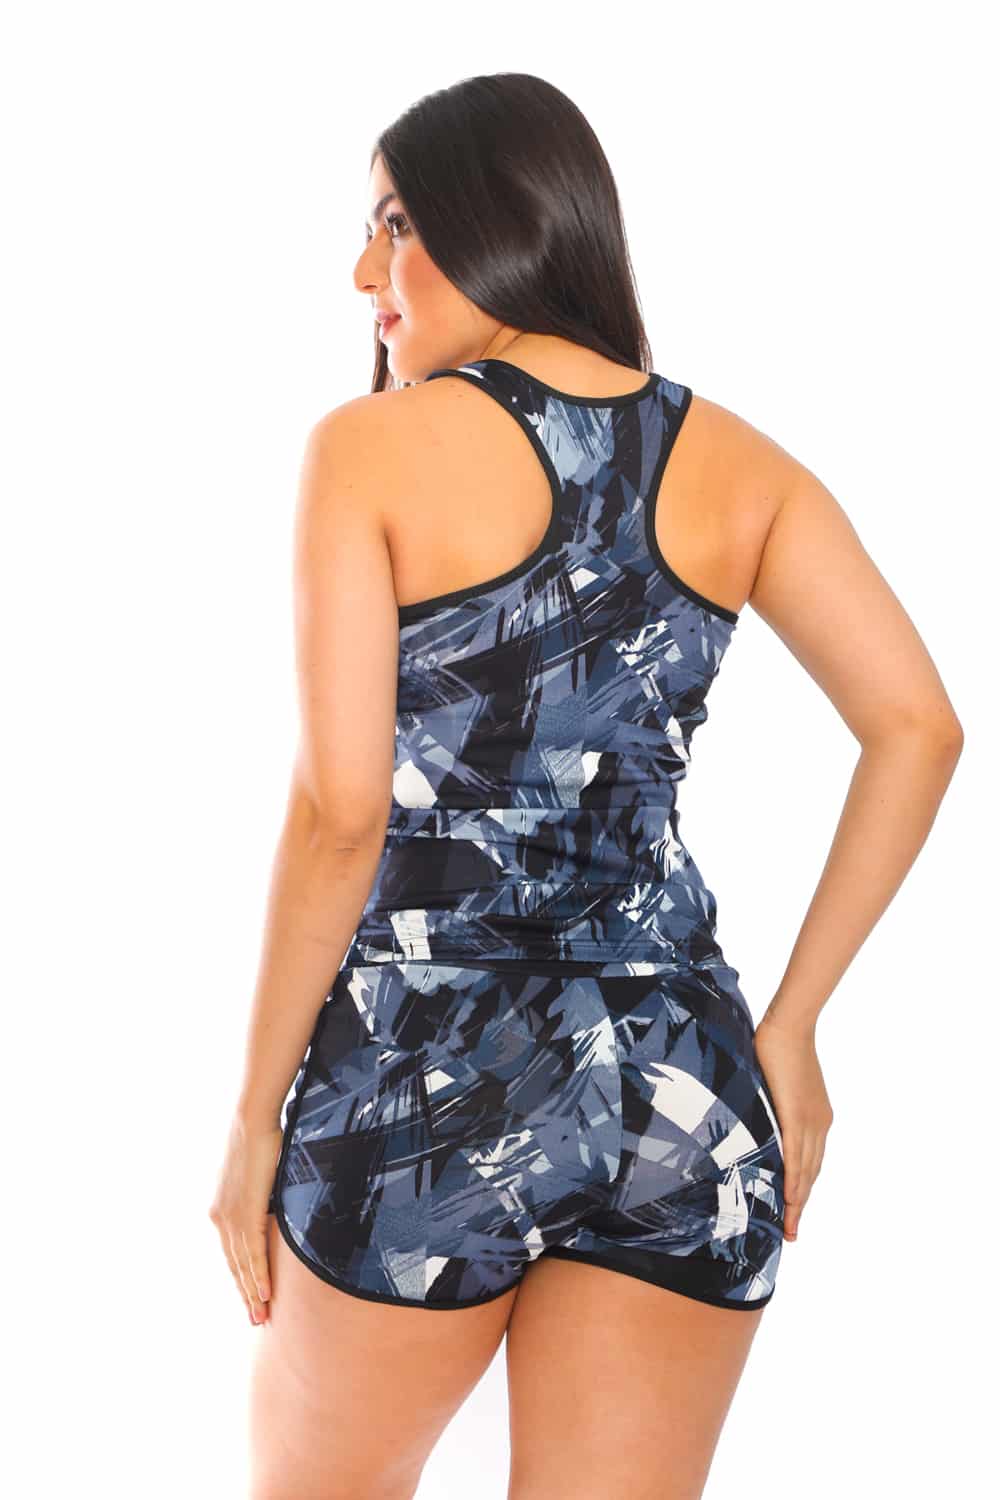 Activewear Set With a Racer Back Tank Top - 26